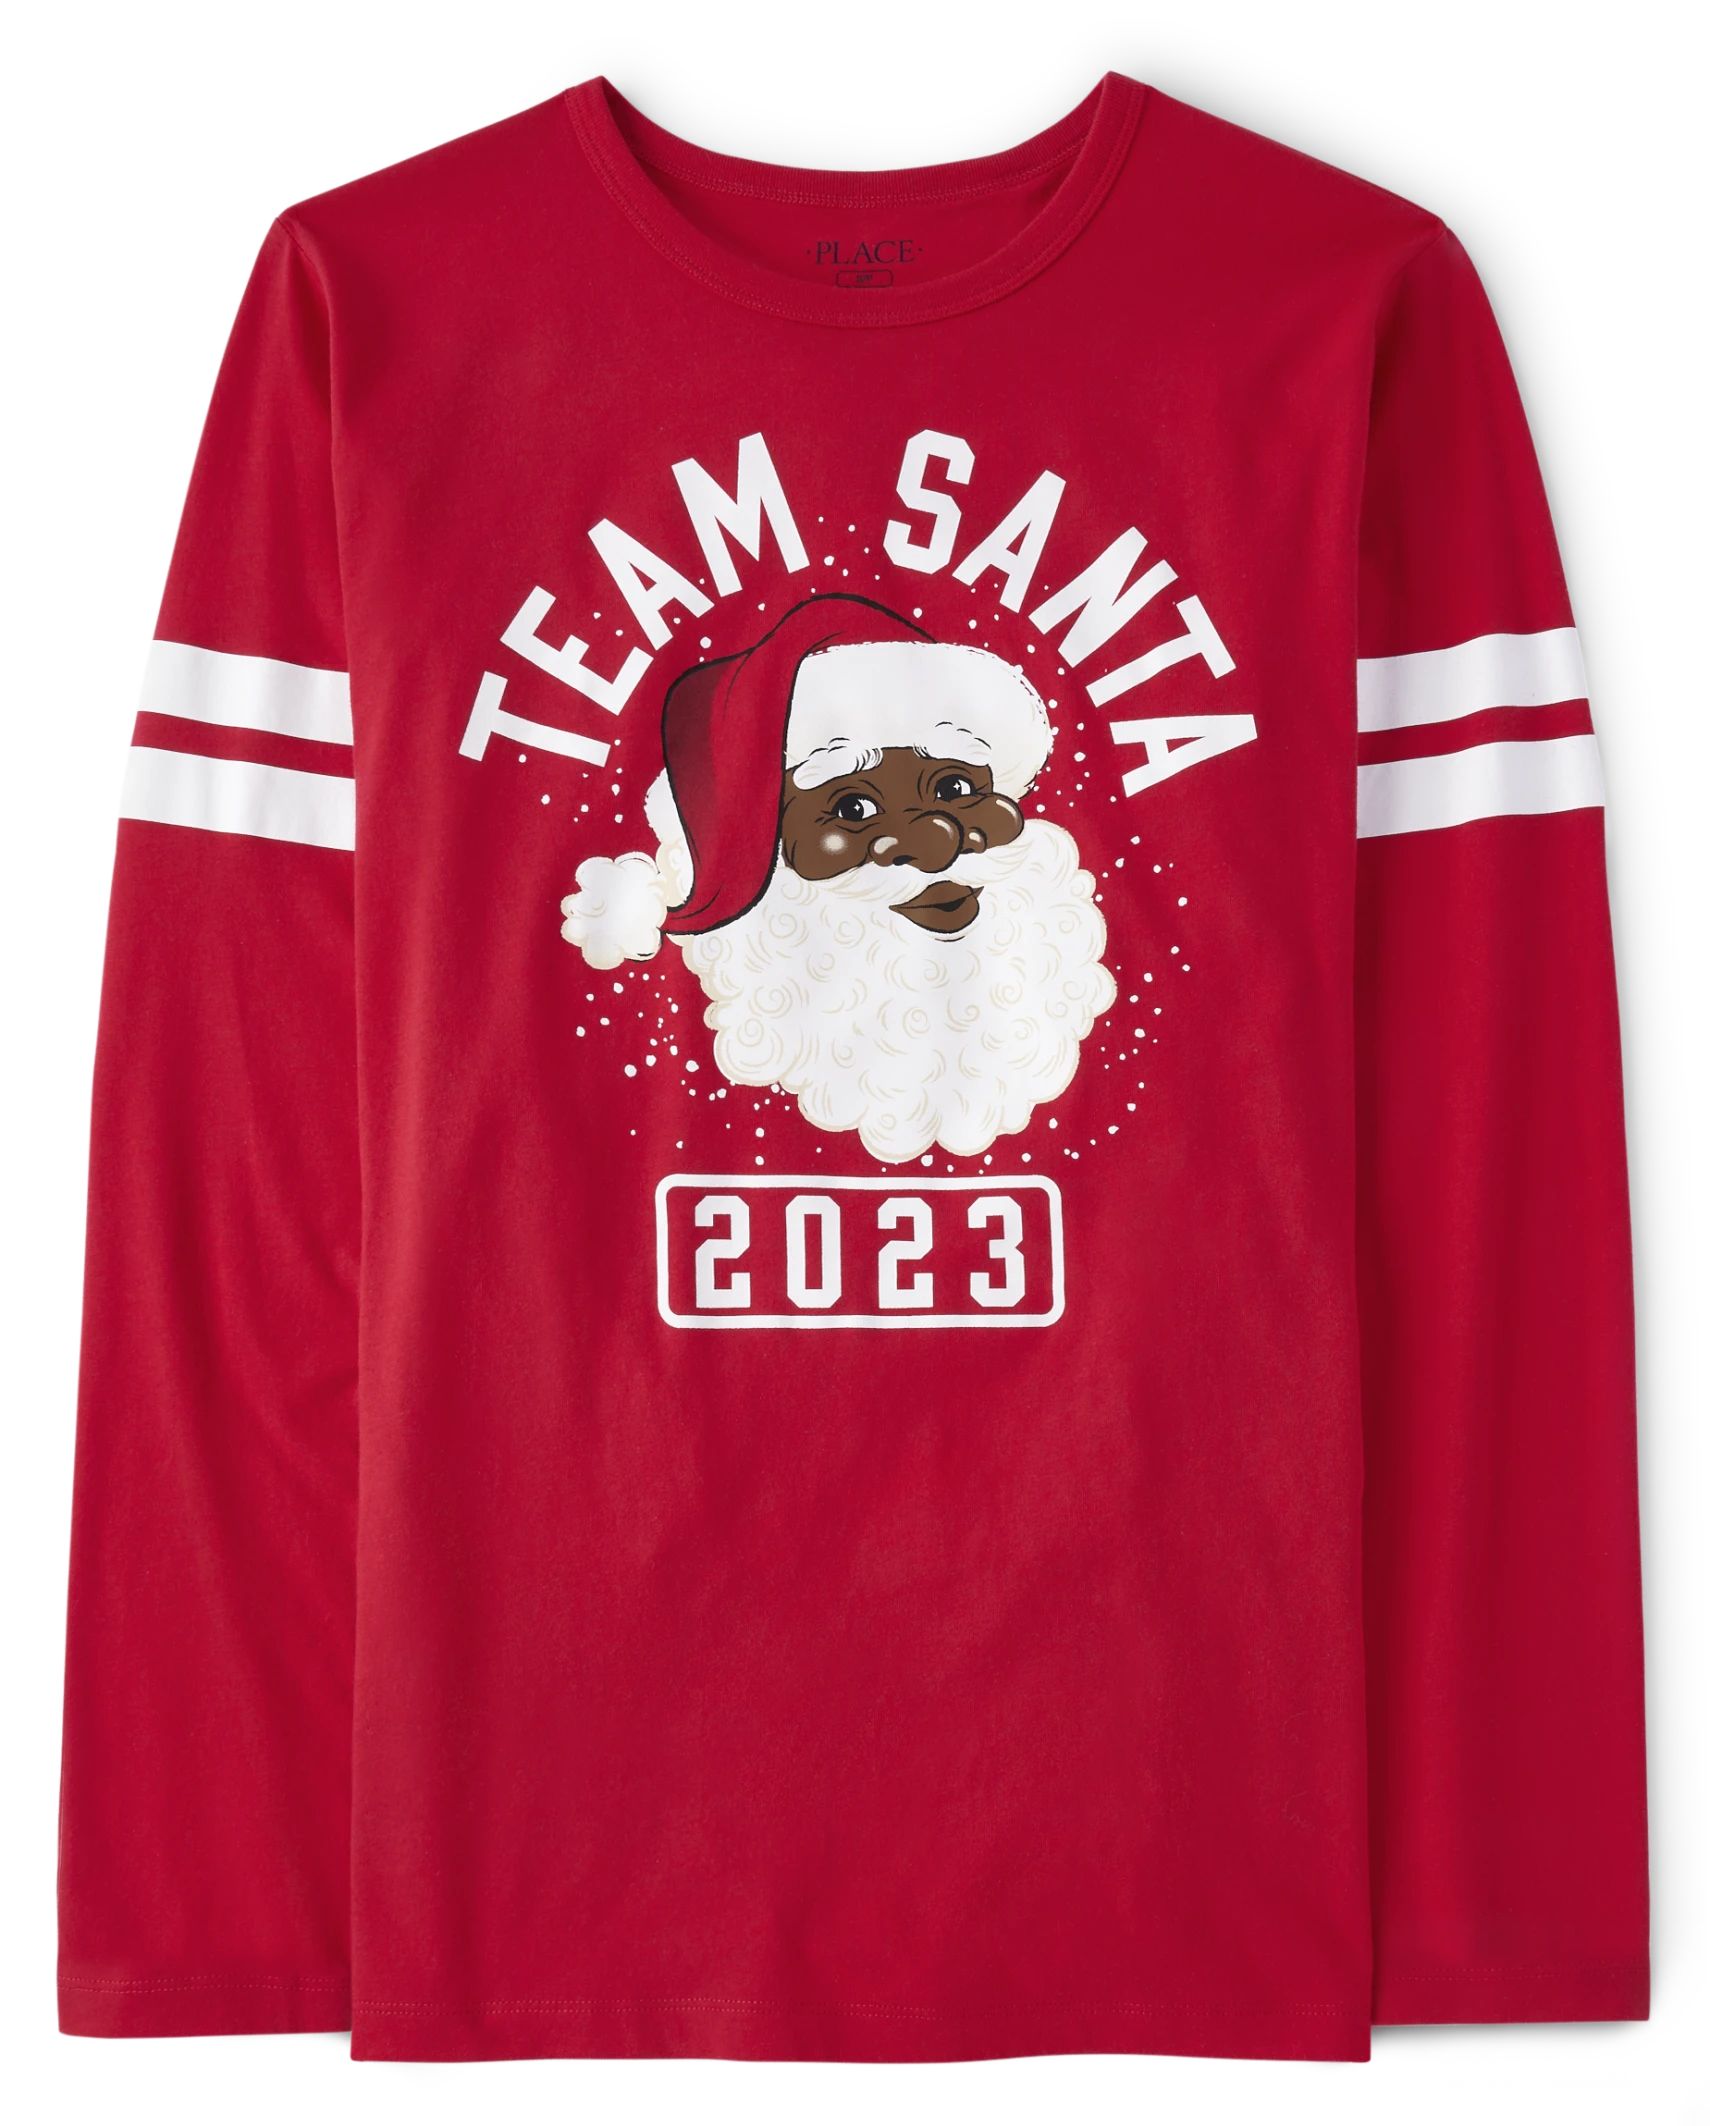 Unisex Adult Matching Family Team Santa Graphic Tee - ruby | The Children's Place